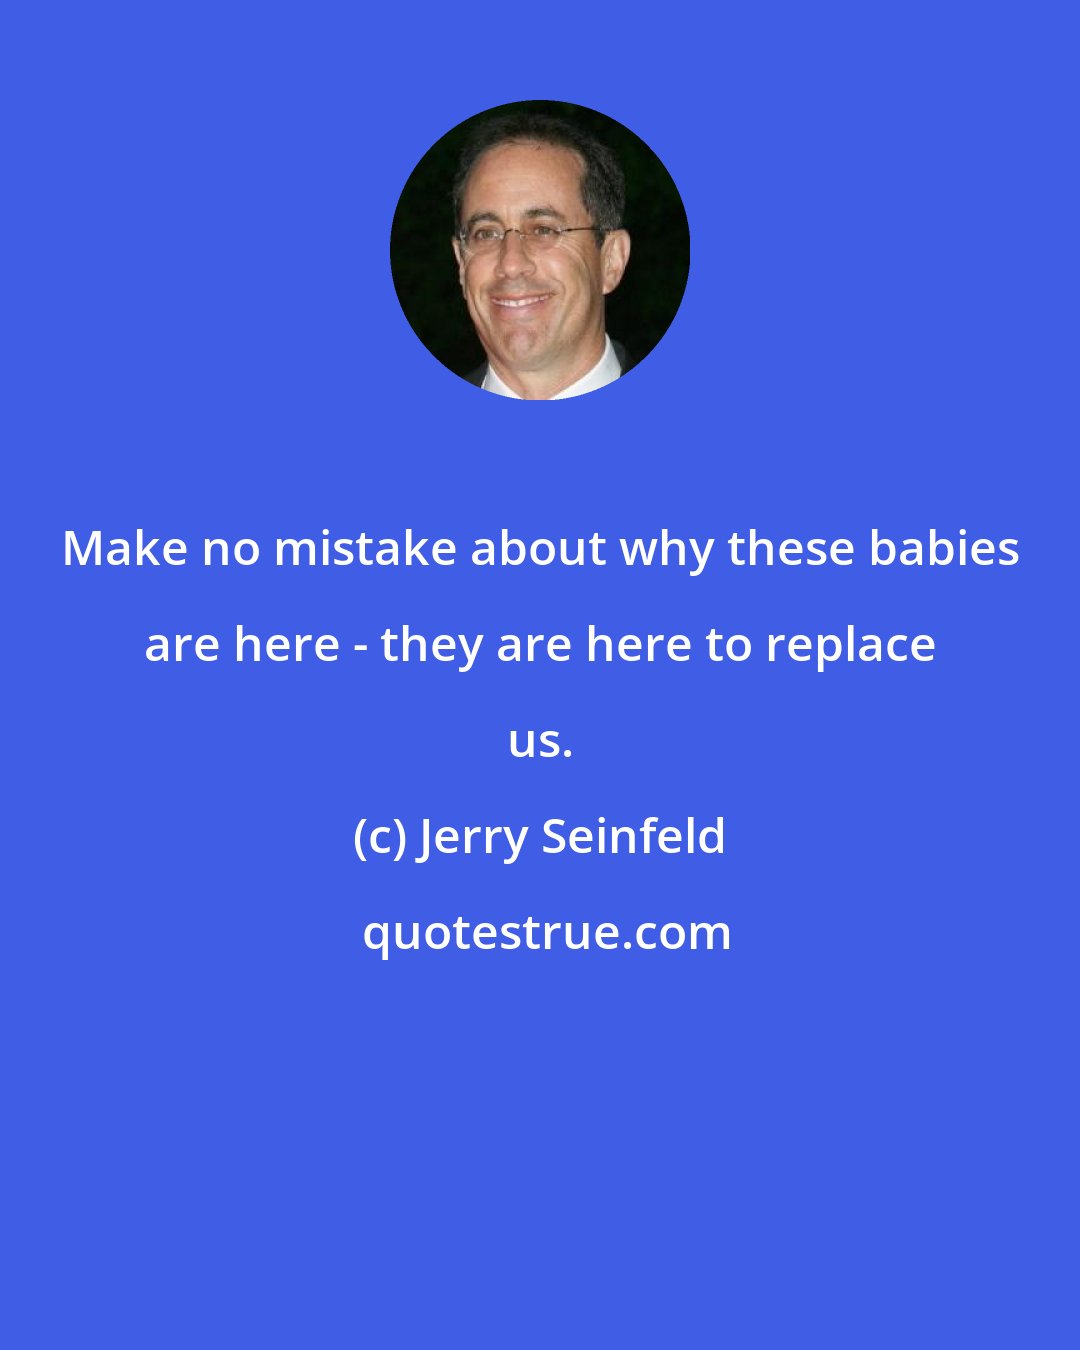 Jerry Seinfeld: Make no mistake about why these babies are here - they are here to replace us.